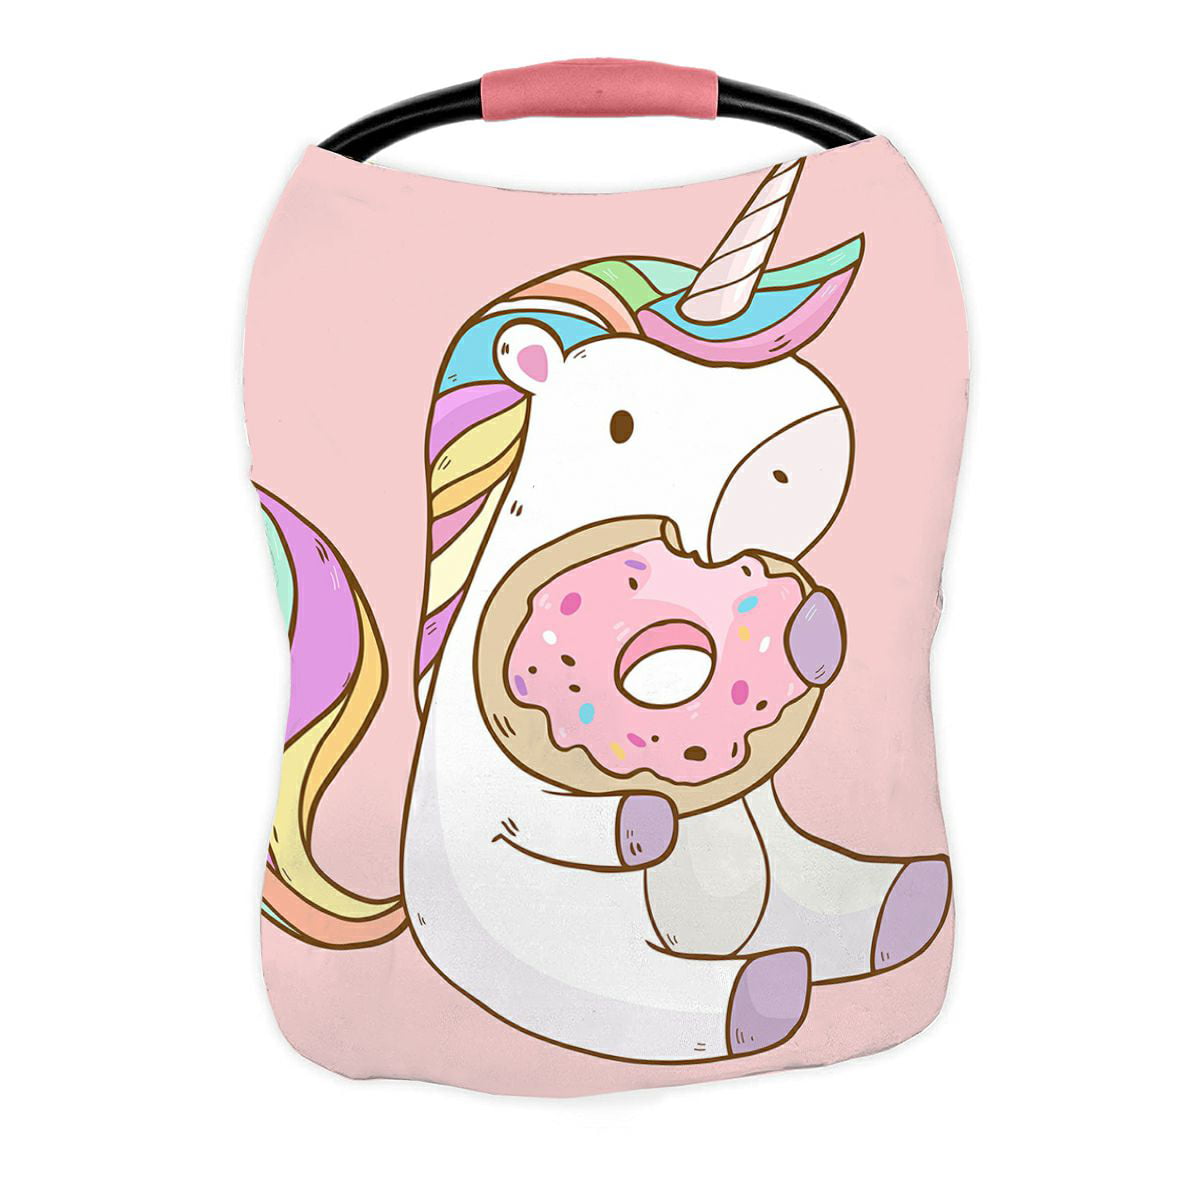 ABPHQTO Cute Cartoon Unicorn Eating Tasty Donuts Nursing Cover Baby  Breastfeeding Infant Feeding Cover Baby Car Seat Cover Infant Stroller  Cover Carseat Canopy Breathable 